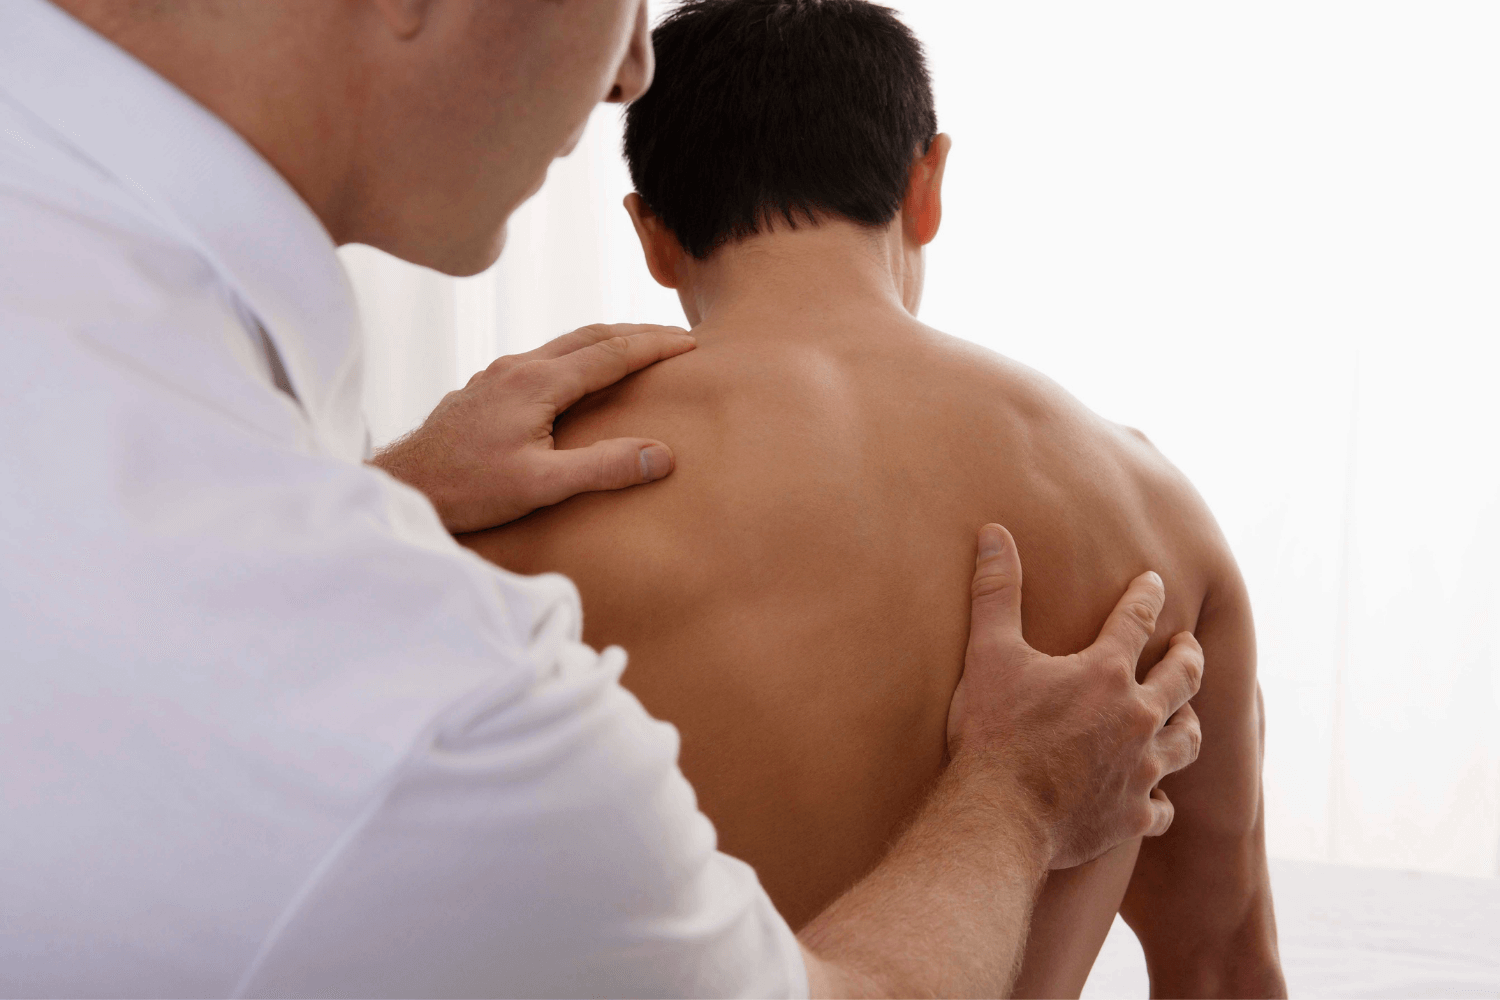 Osteopathe corps soin essonne les ulis muscle crane organe viscere